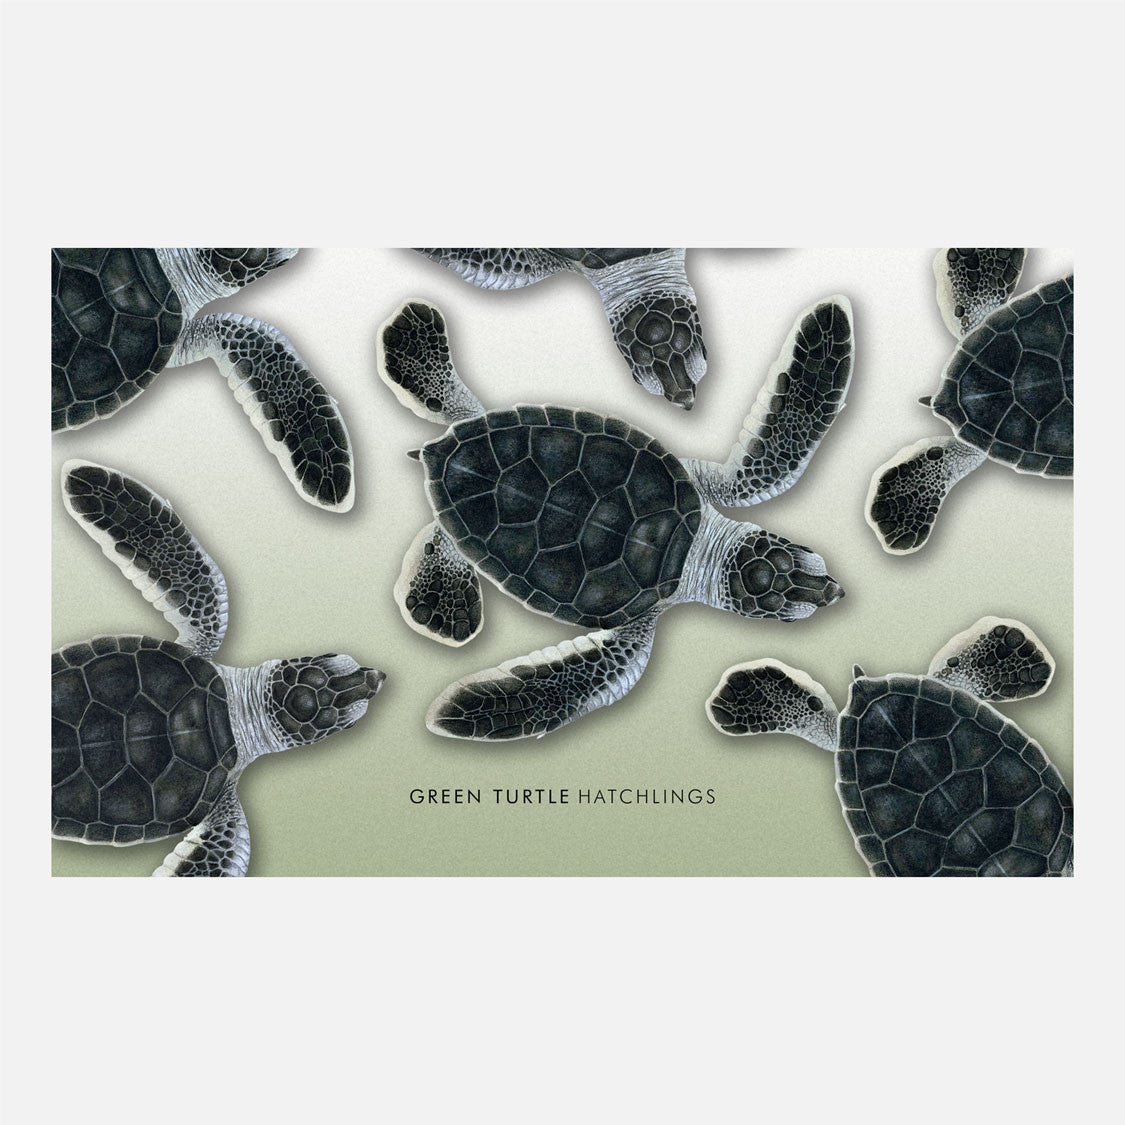 This design is an illustration of green turtle hatchlings, Chelonia midas. 